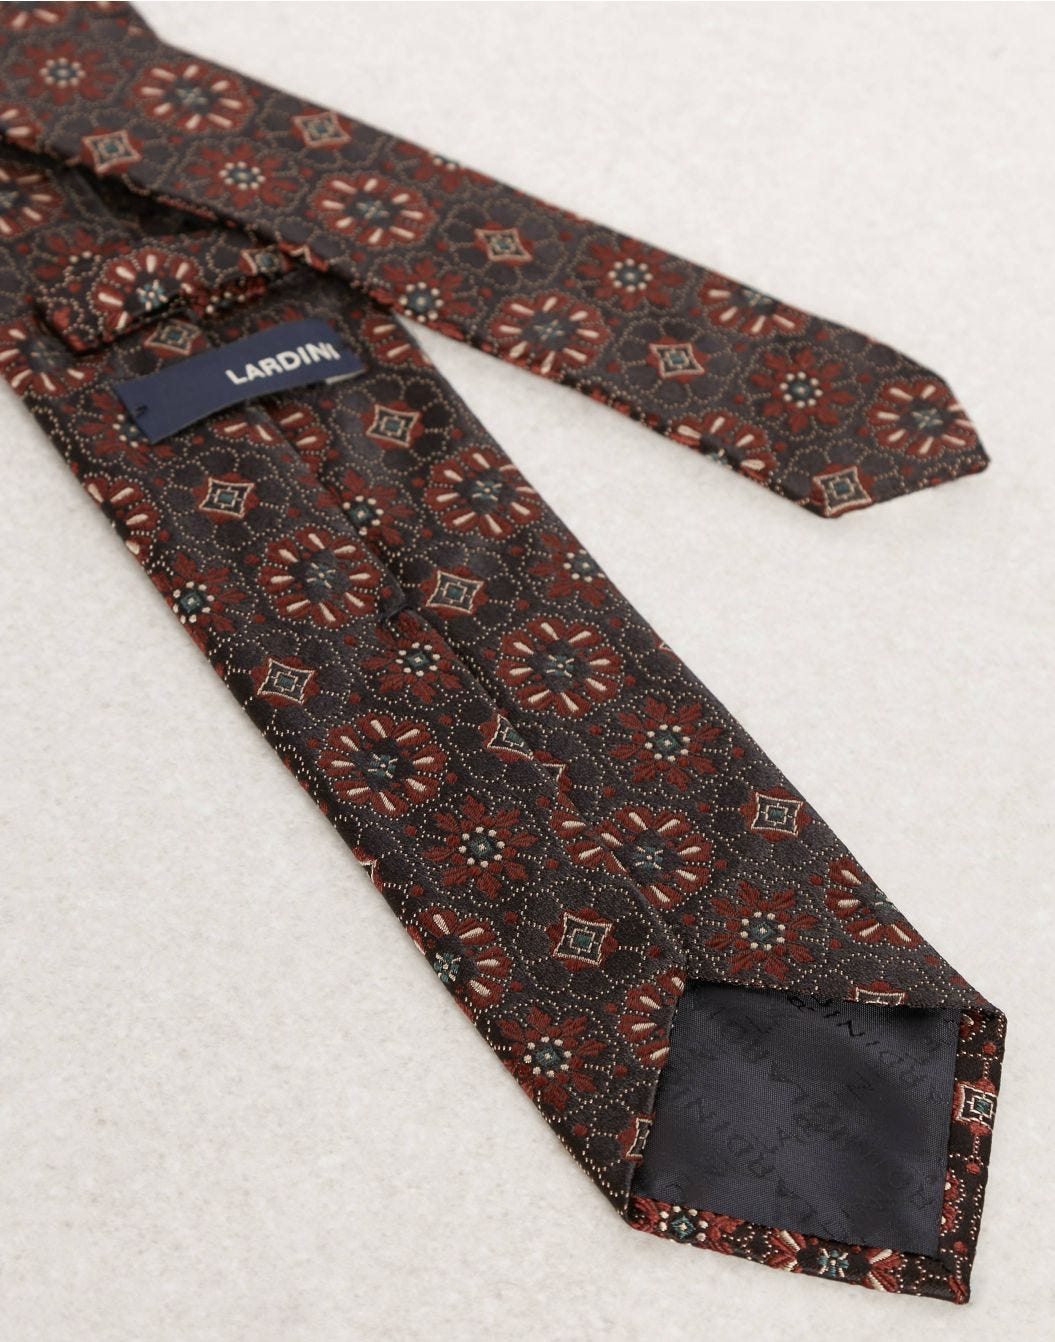 Classic tie in silk with a floral jacquard pattern